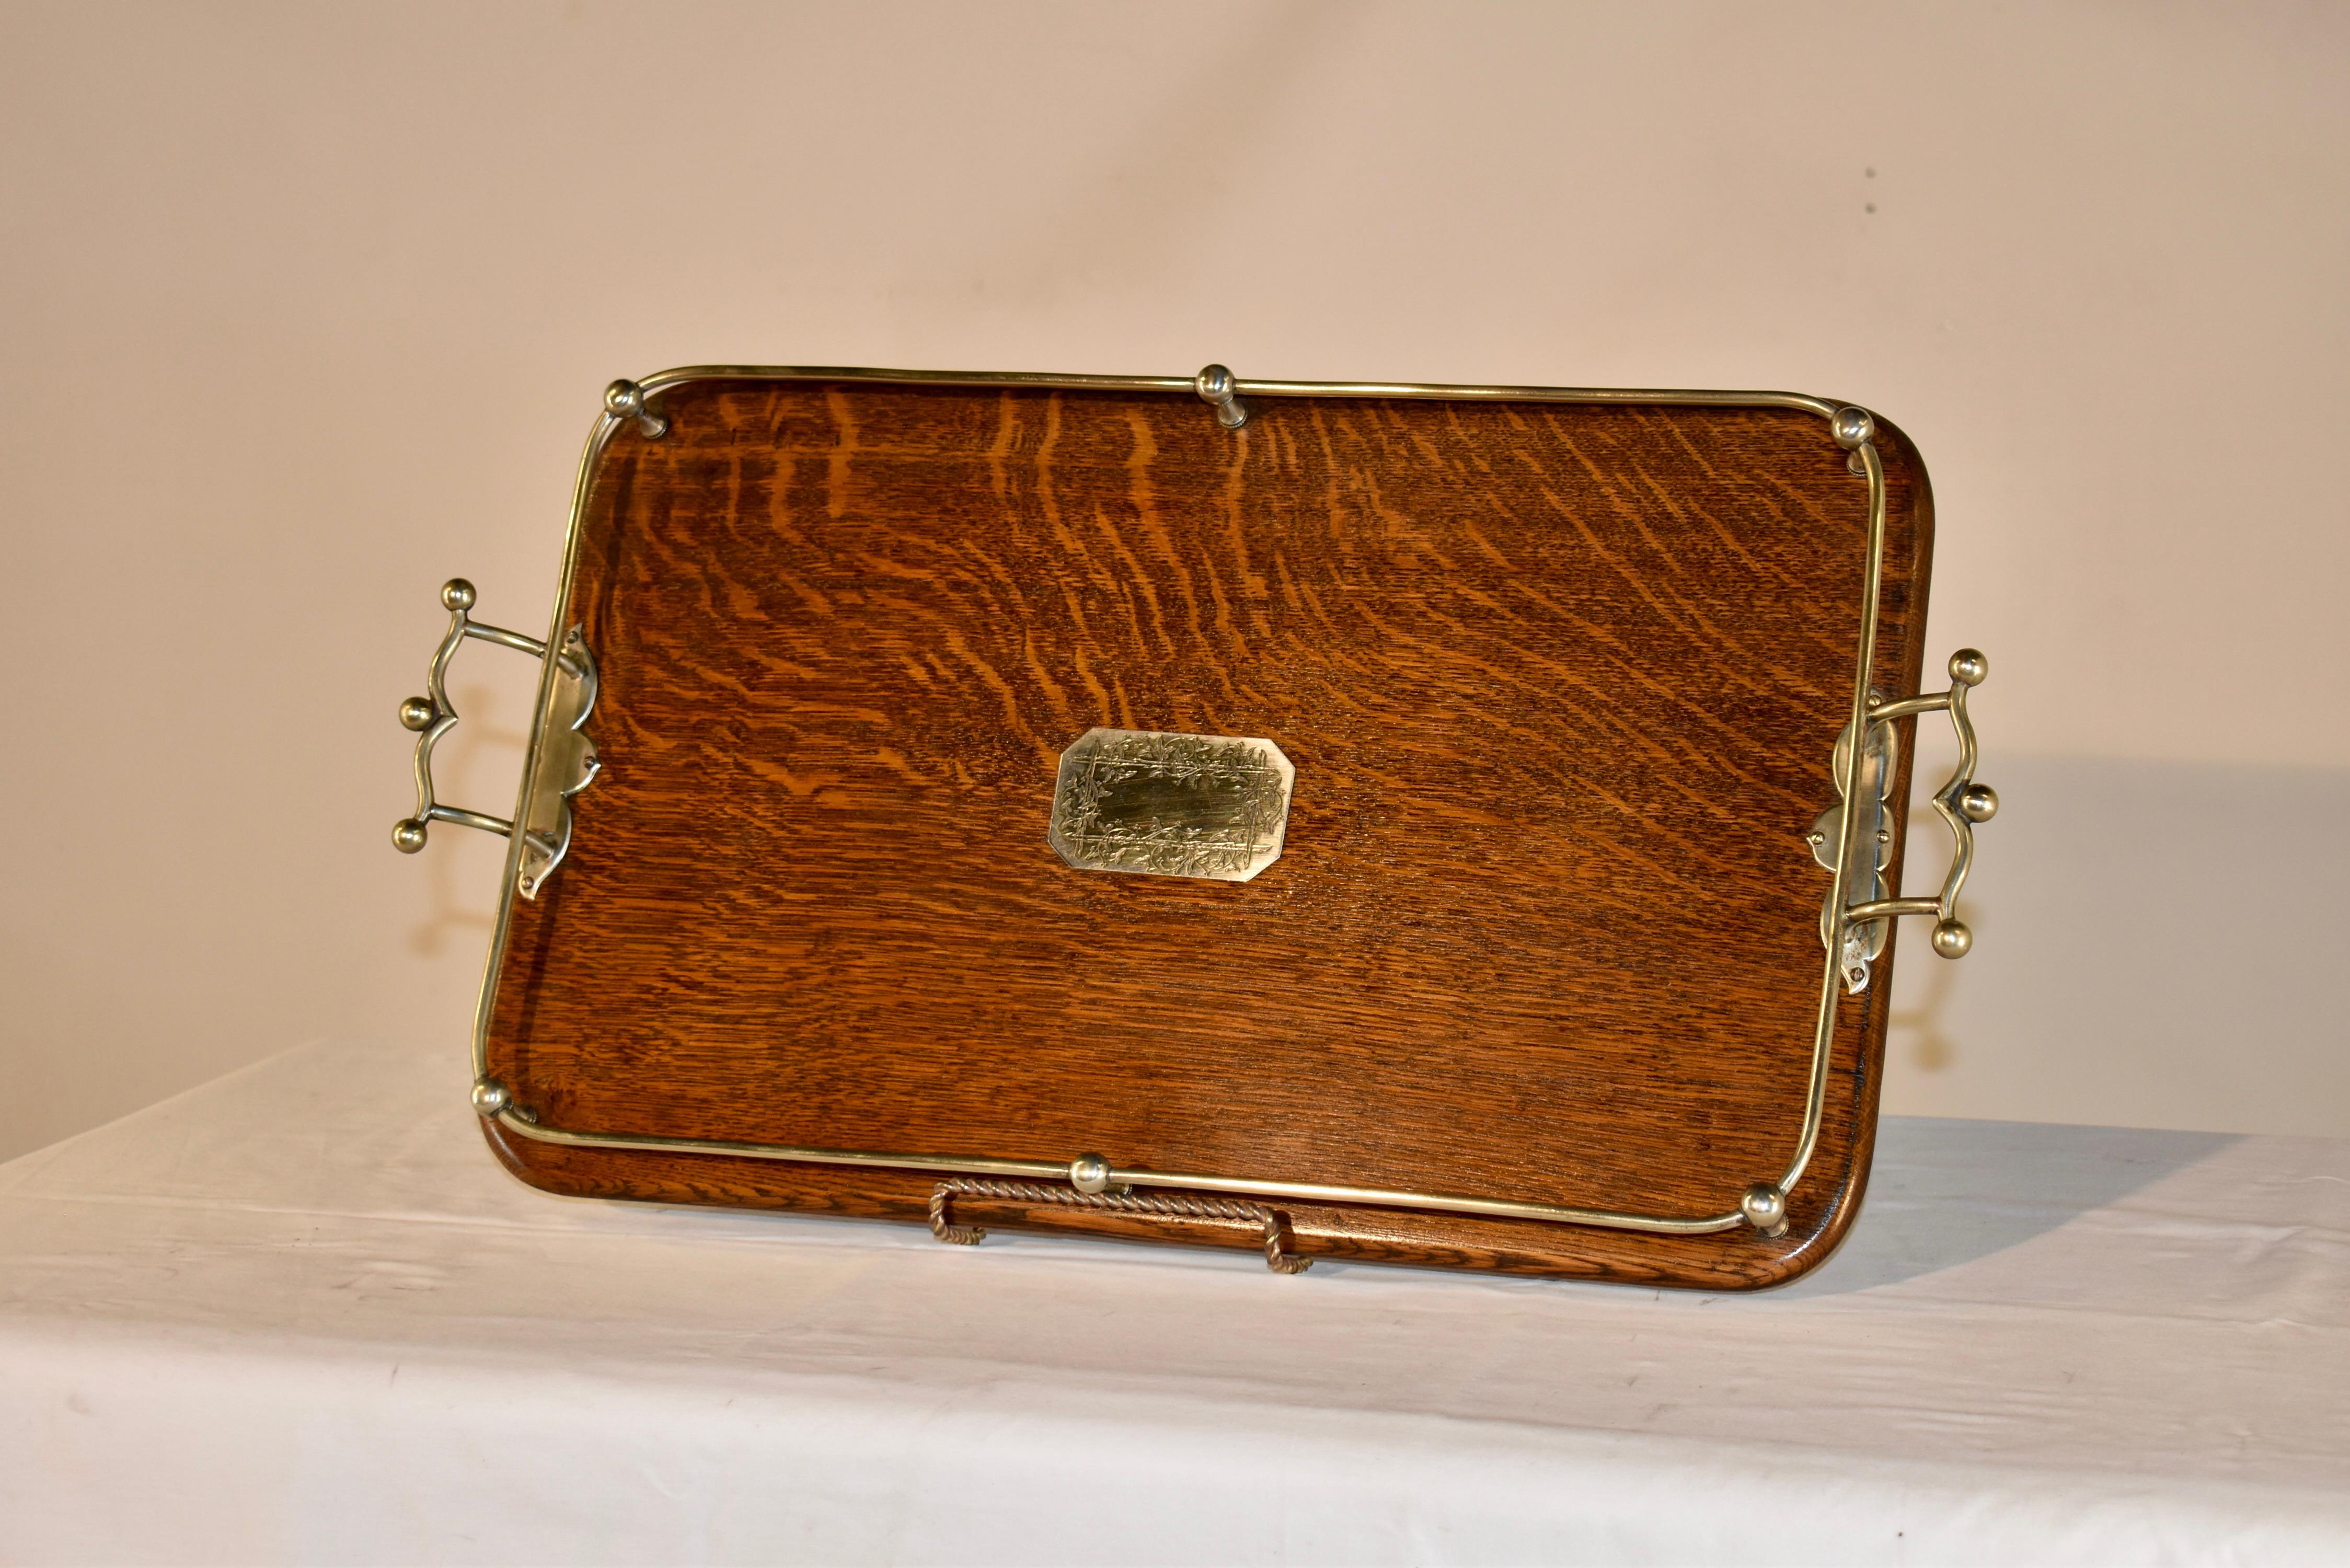 Late 19th century oak tray from England.  The tray has lovely graining along with a central silver plated plaque, which has a trellis and vine decoration.  The tray has a silver plated gallery and lovely cast handles, along with silver plated feet. 